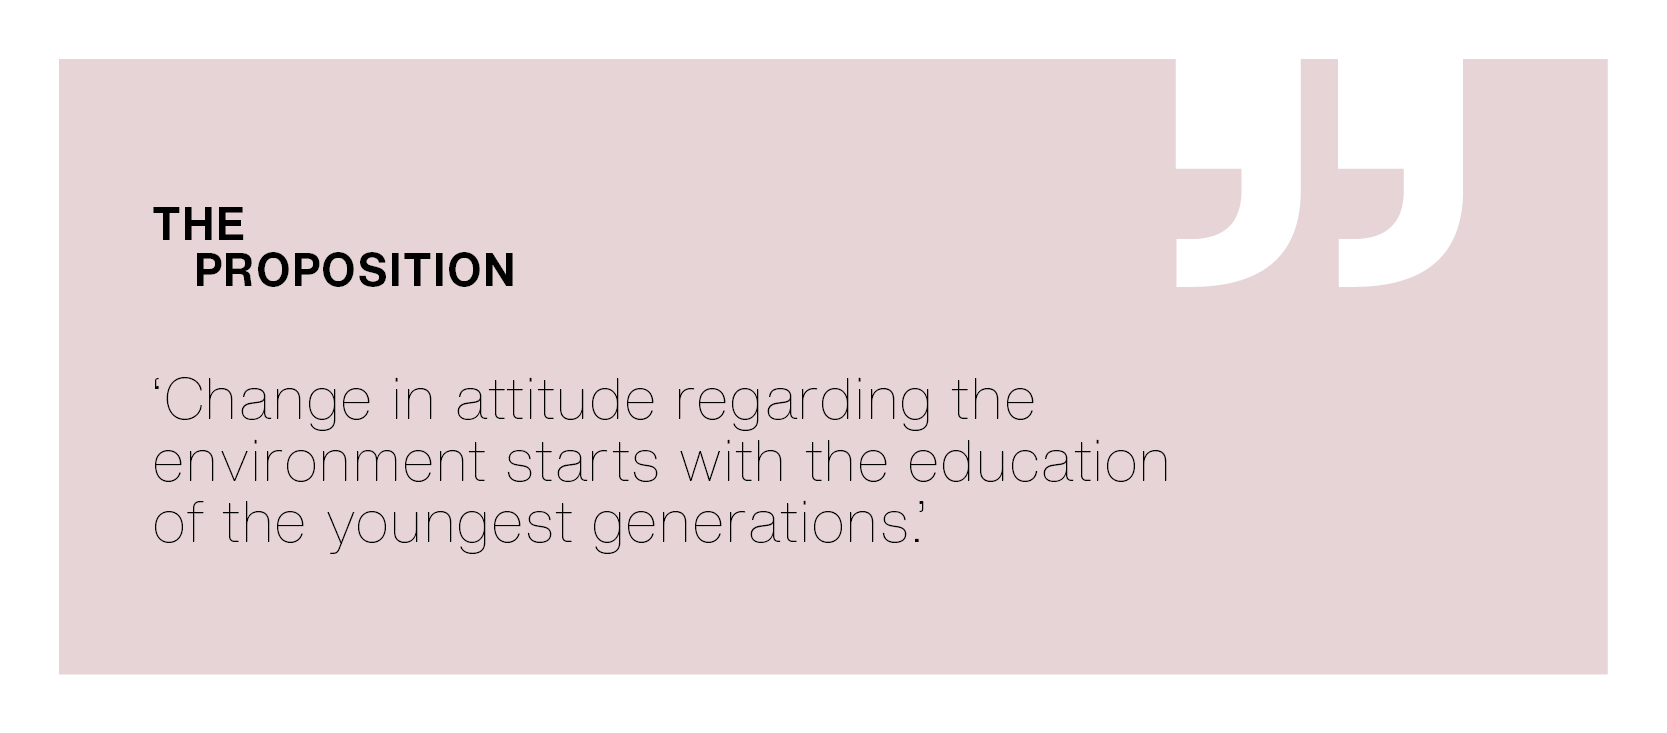 [The Proposition] ‘Change in attitude regarding the environment starts with the education of the youngest generations.’